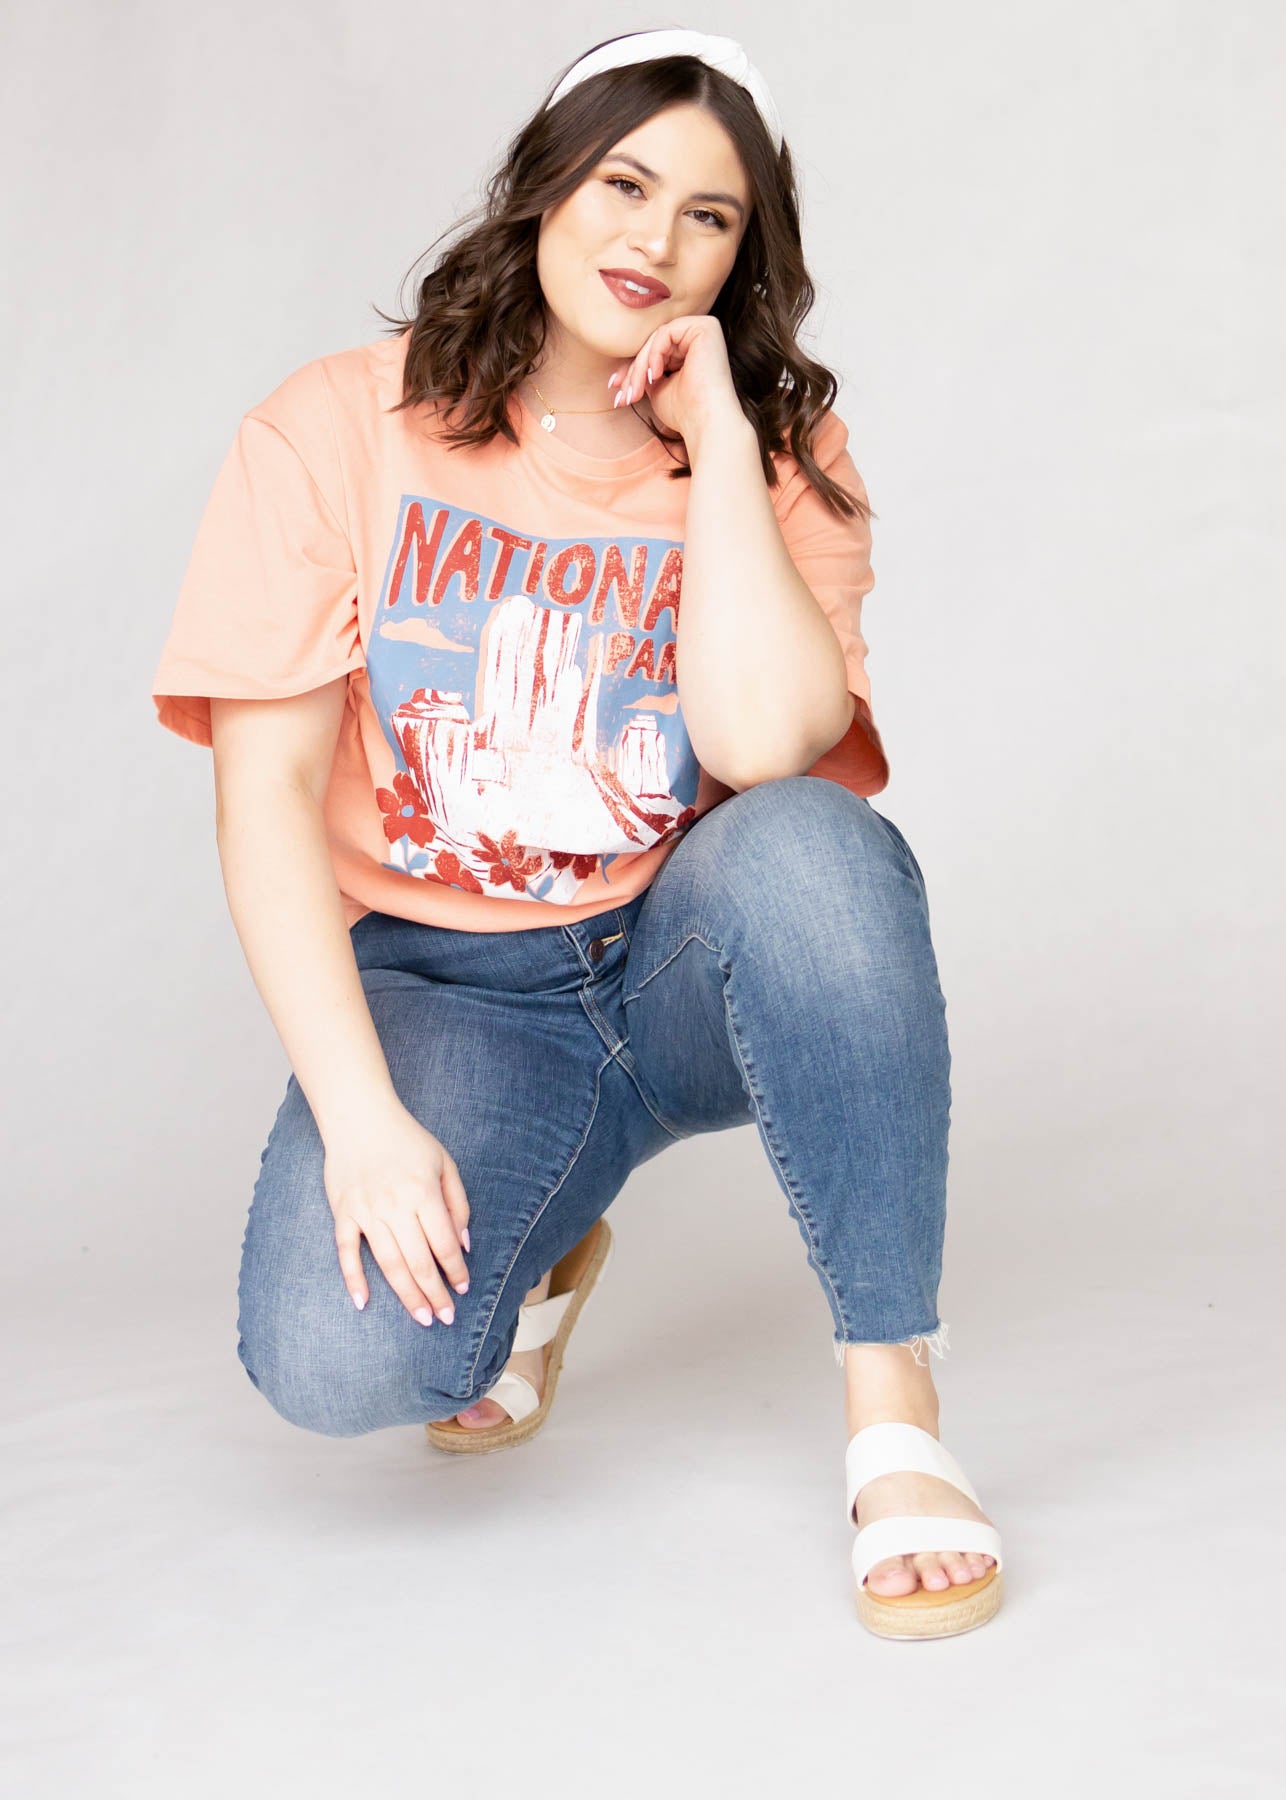 Graphic tee plus size national park salmon top